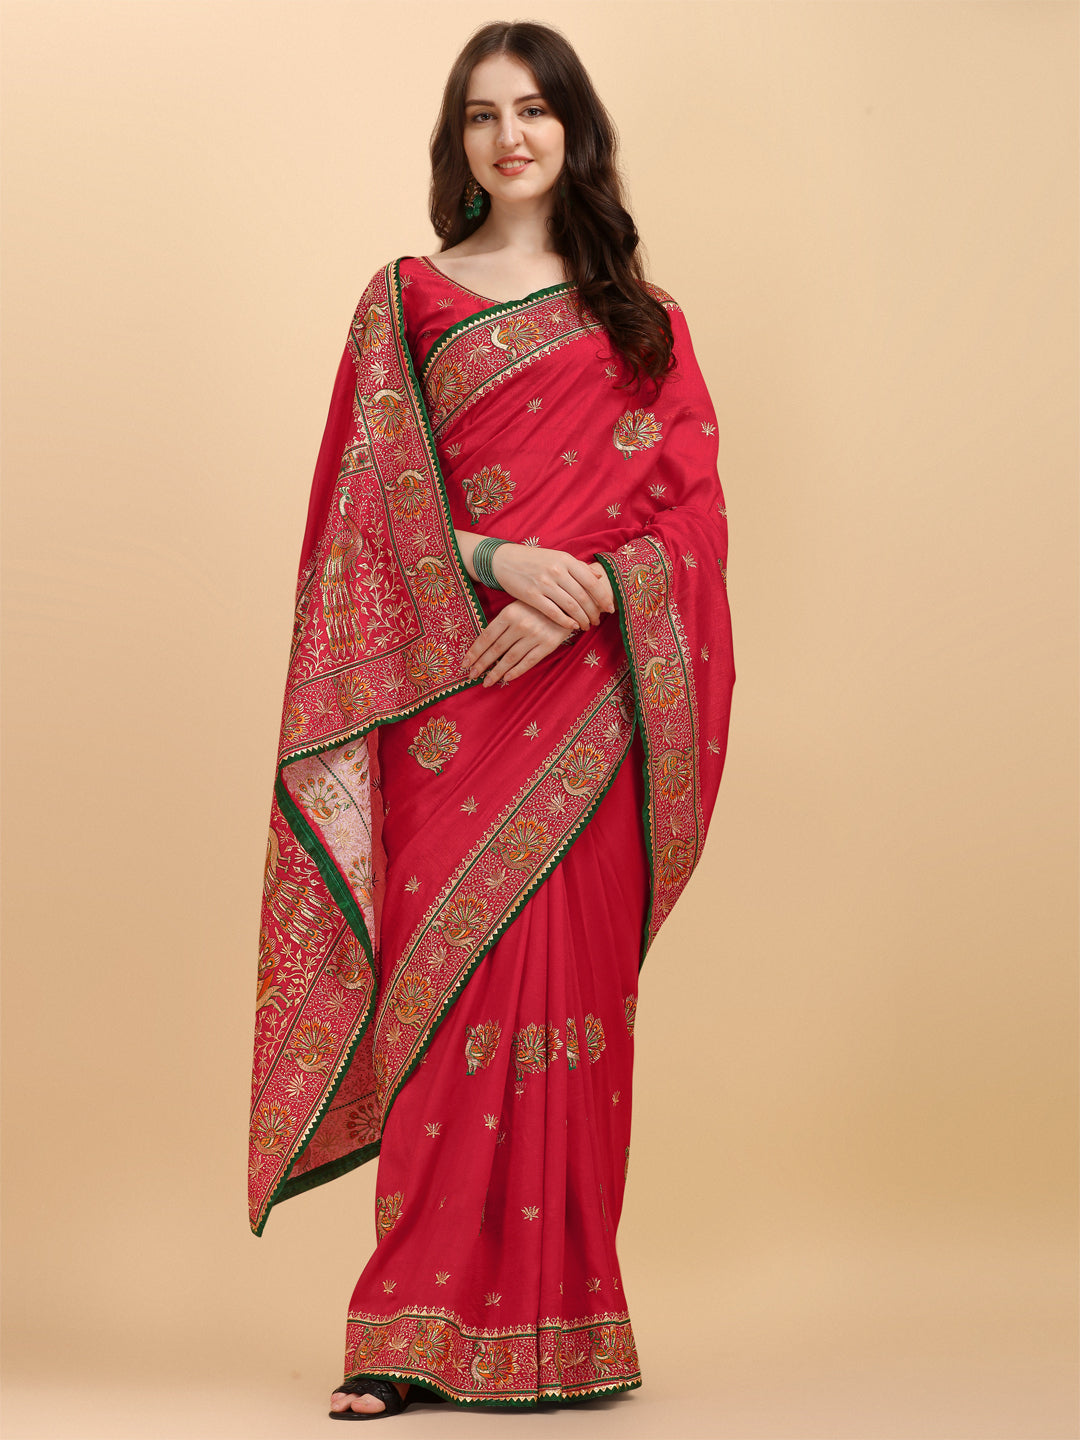 Party Wear Red Color Embroidered Work Vichitra Silk Saree